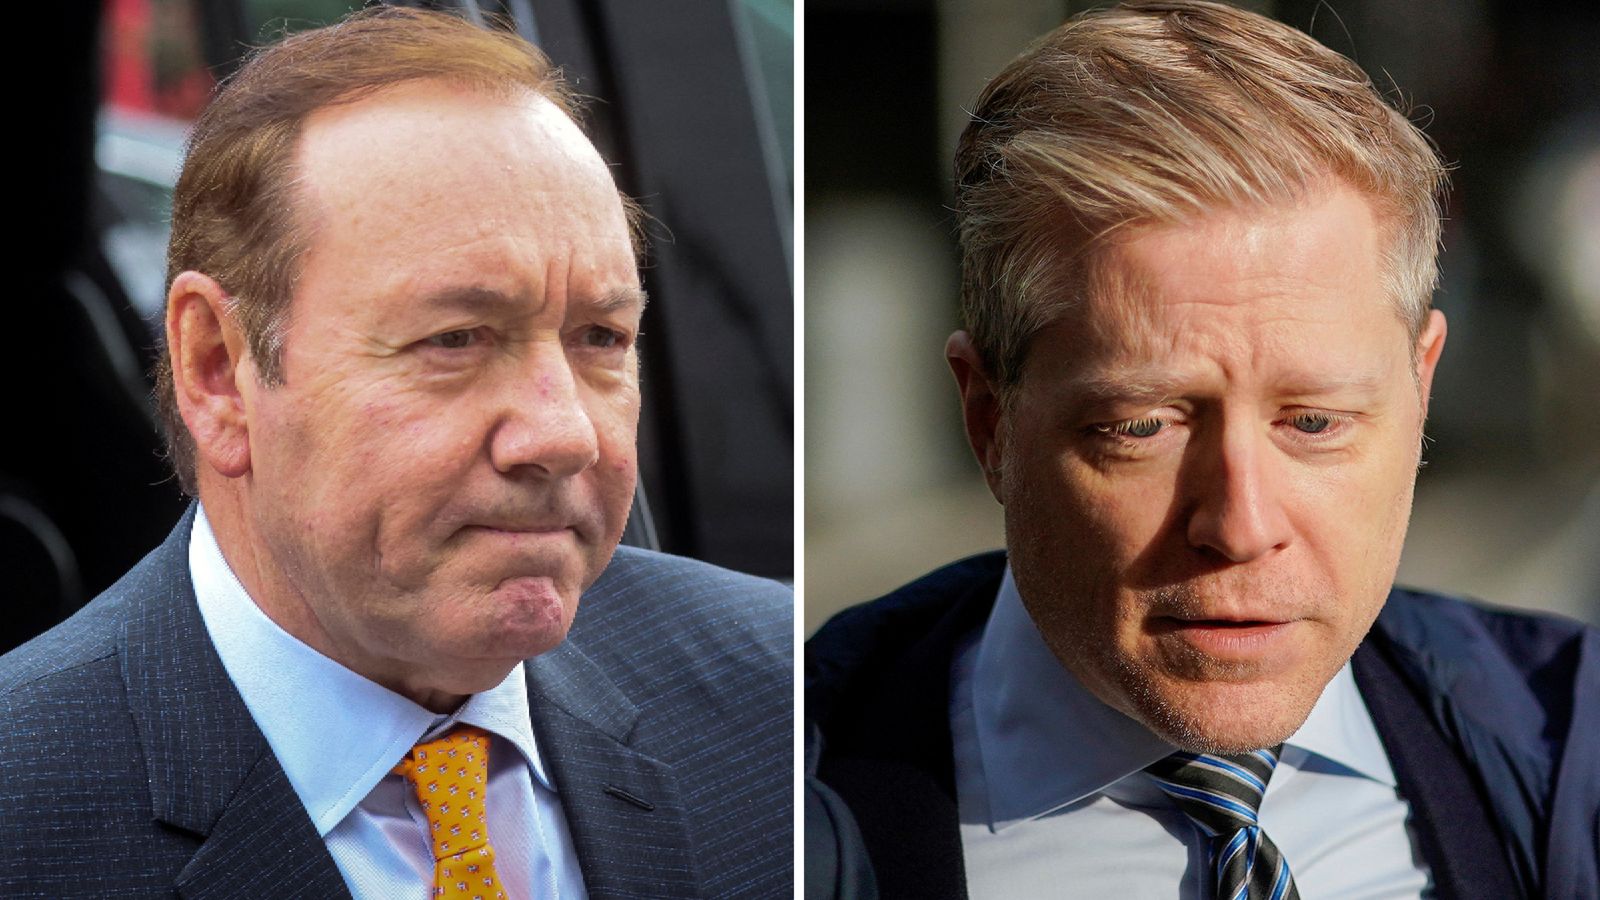 Kevin Spacey did not sexually abuse fellow actor Anthony Rapp in the 1980s, jury finds